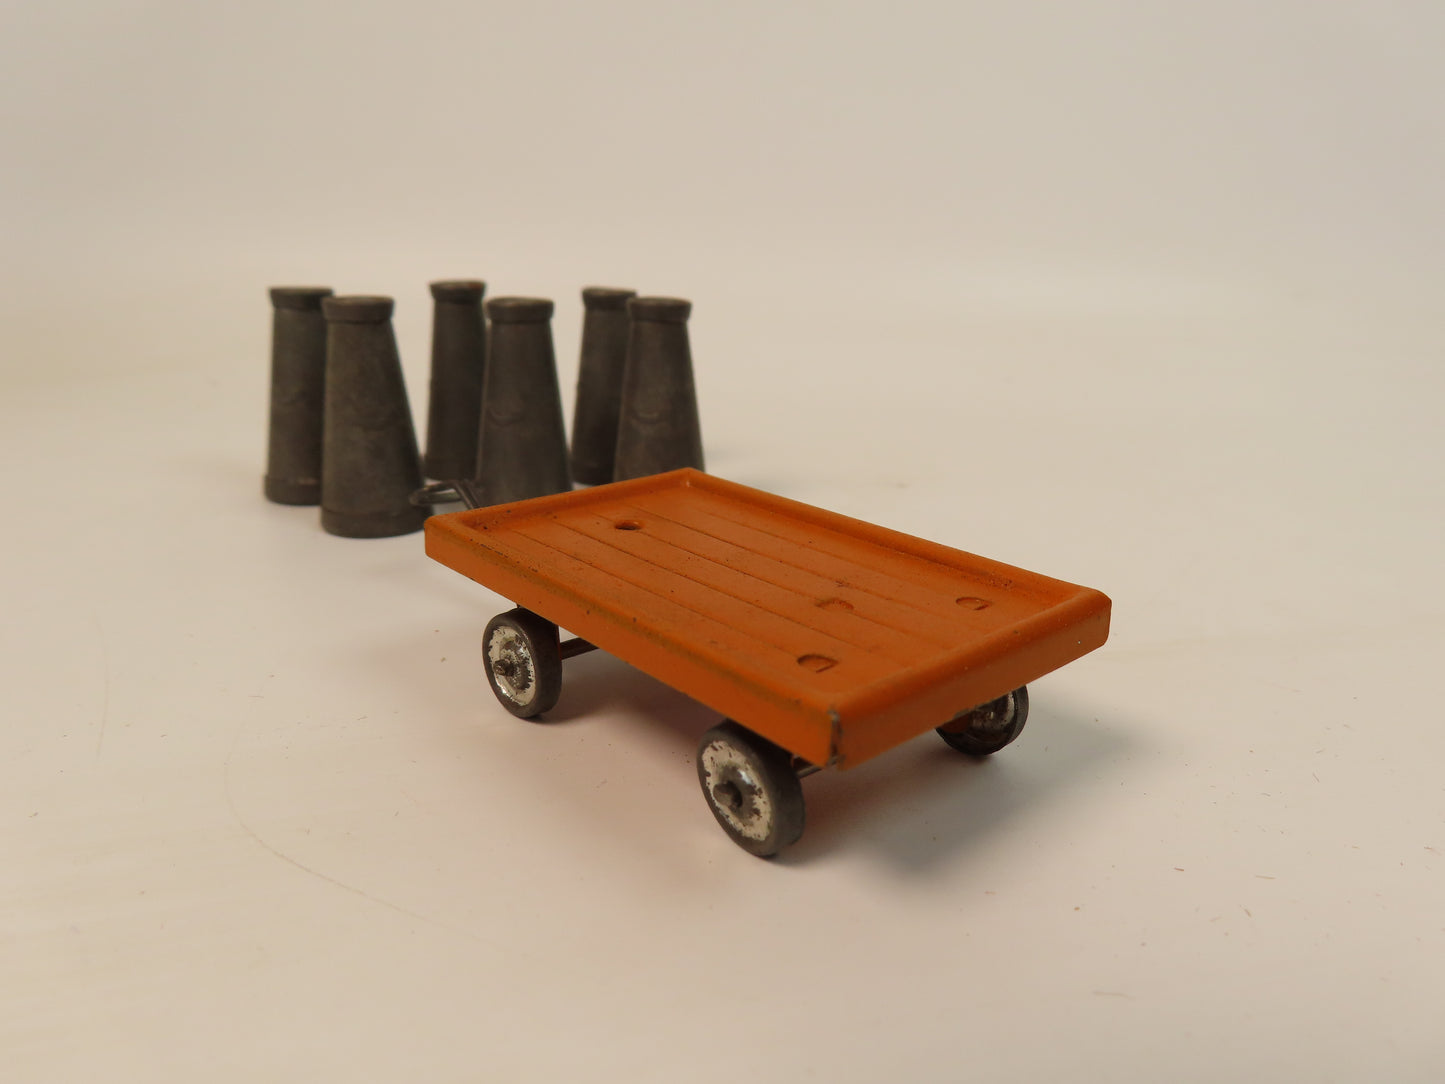 Hornby Series Miniature Milk Cans with Truck - Pre-war.